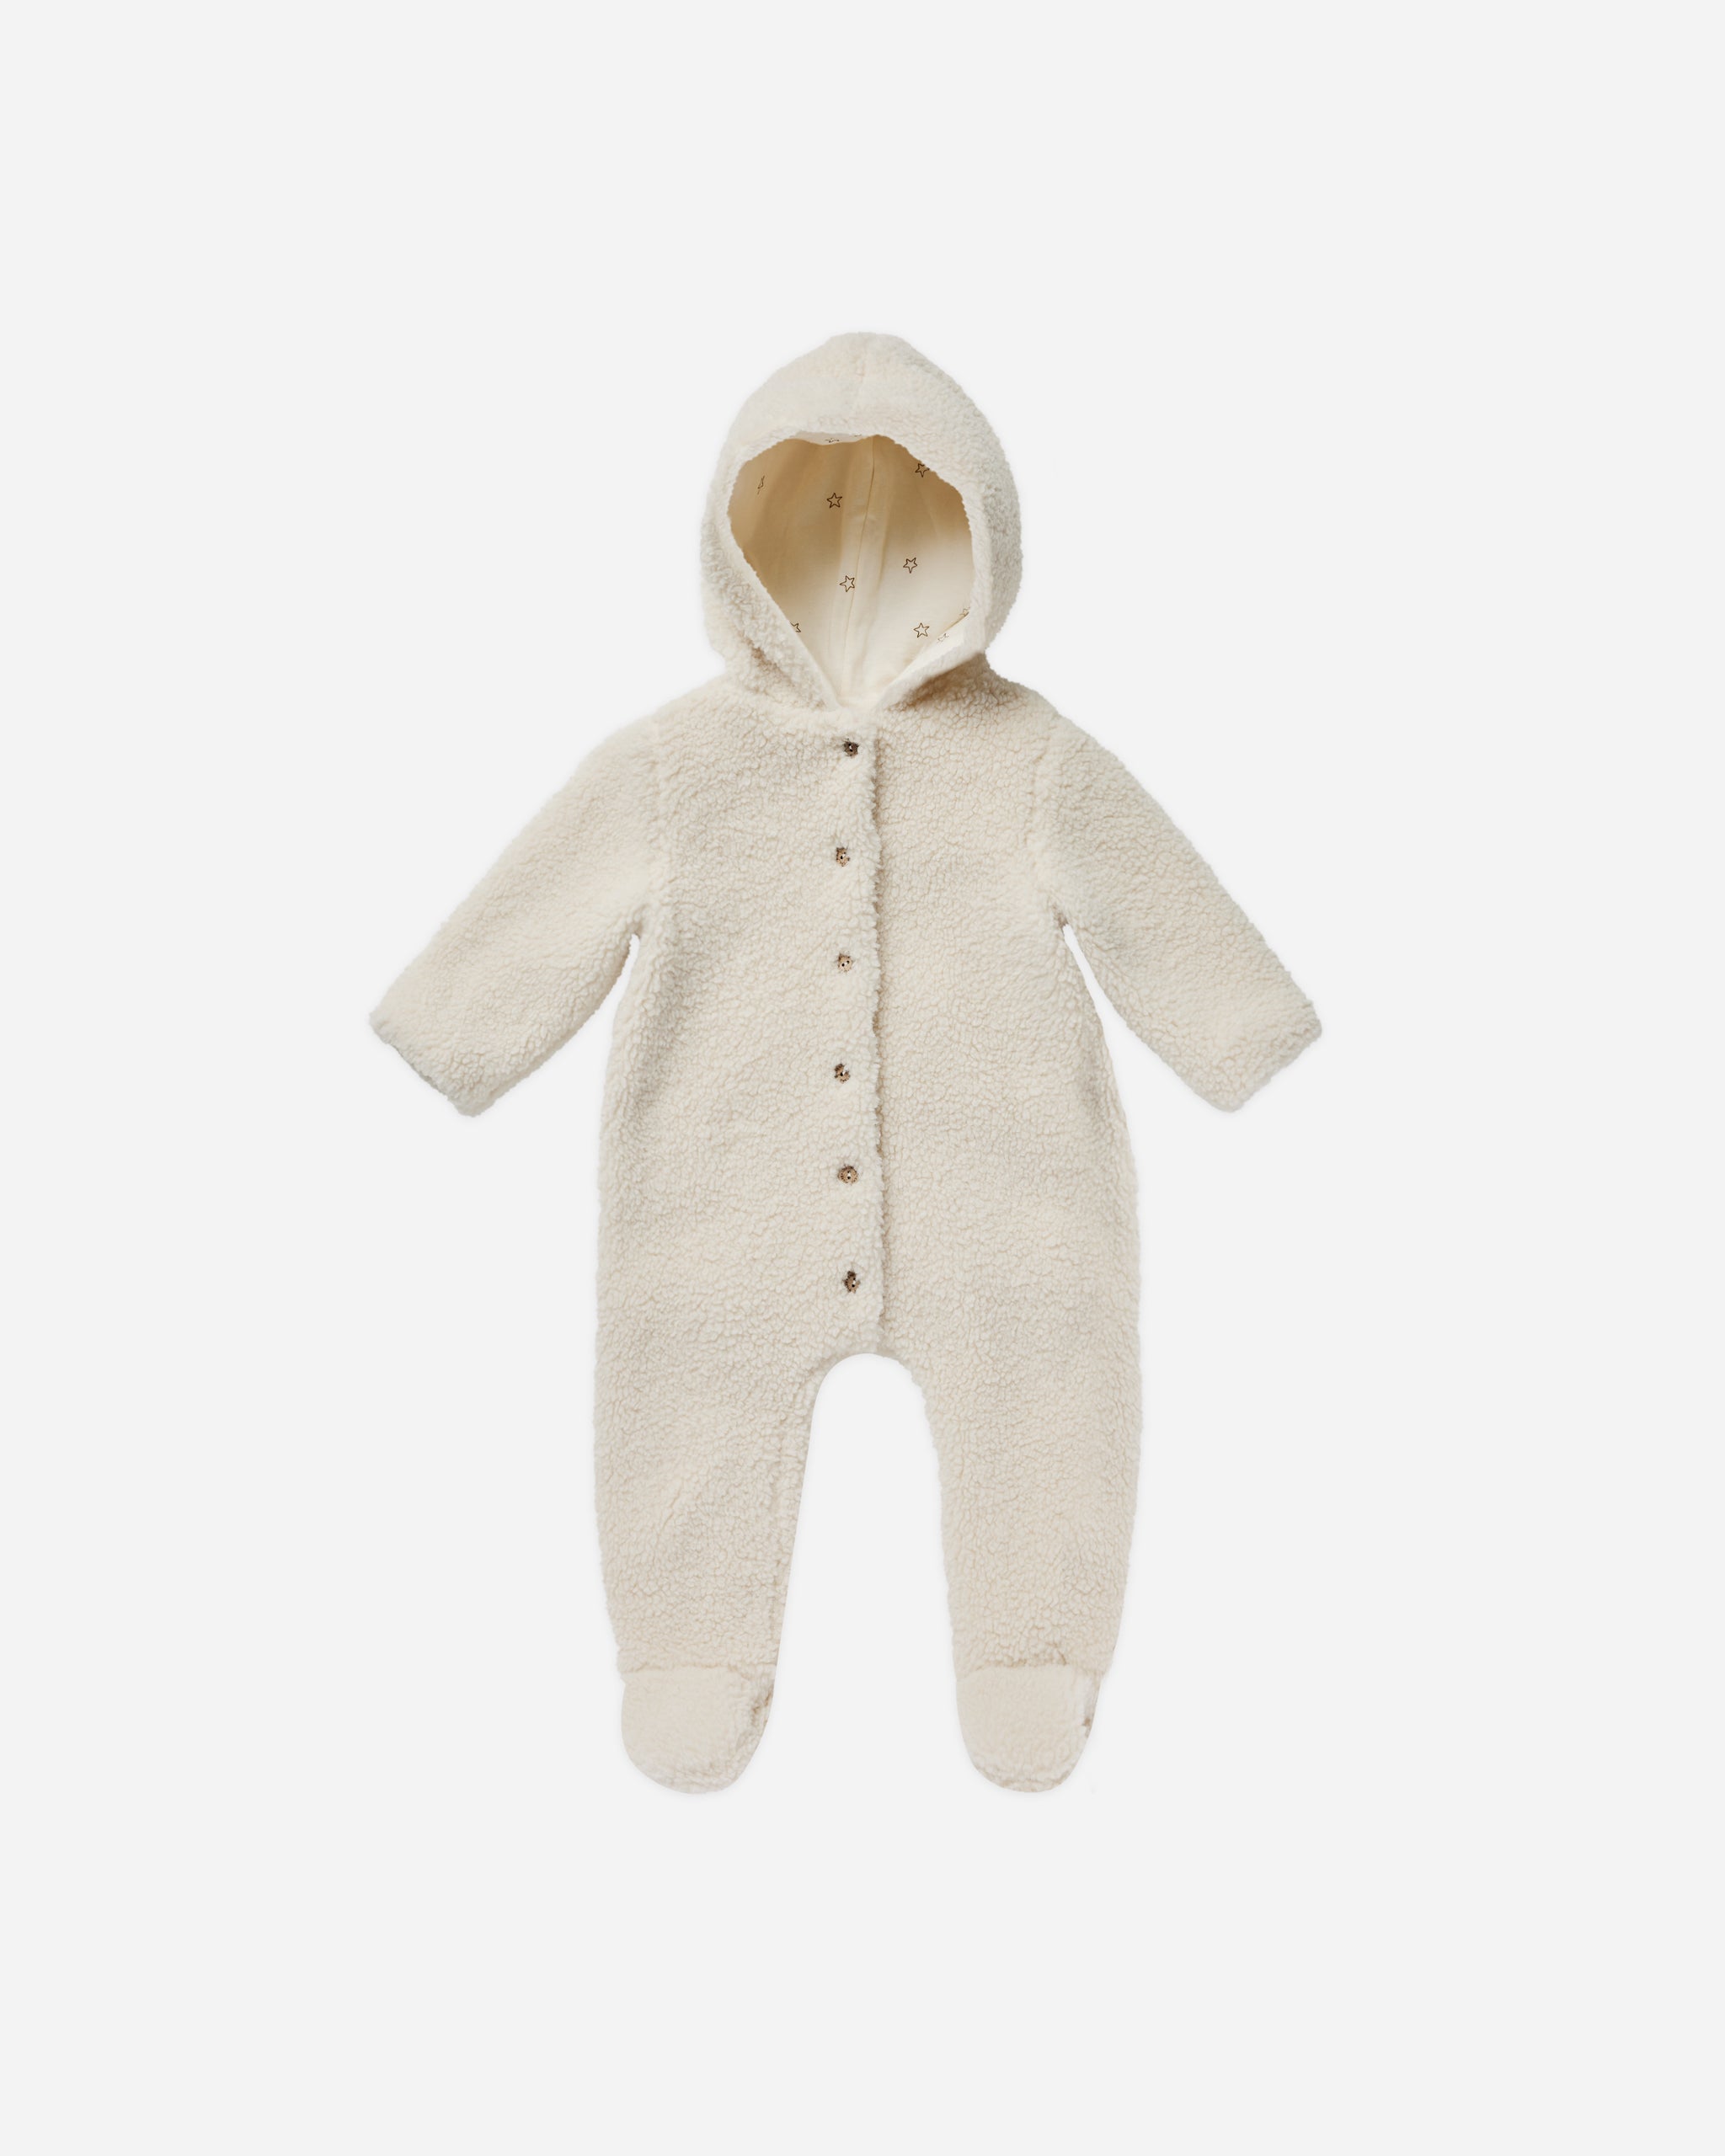 Bear Suit || Natural - Rylee + Cru | Kids Clothes | Trendy Baby Clothes | Modern Infant Outfits |